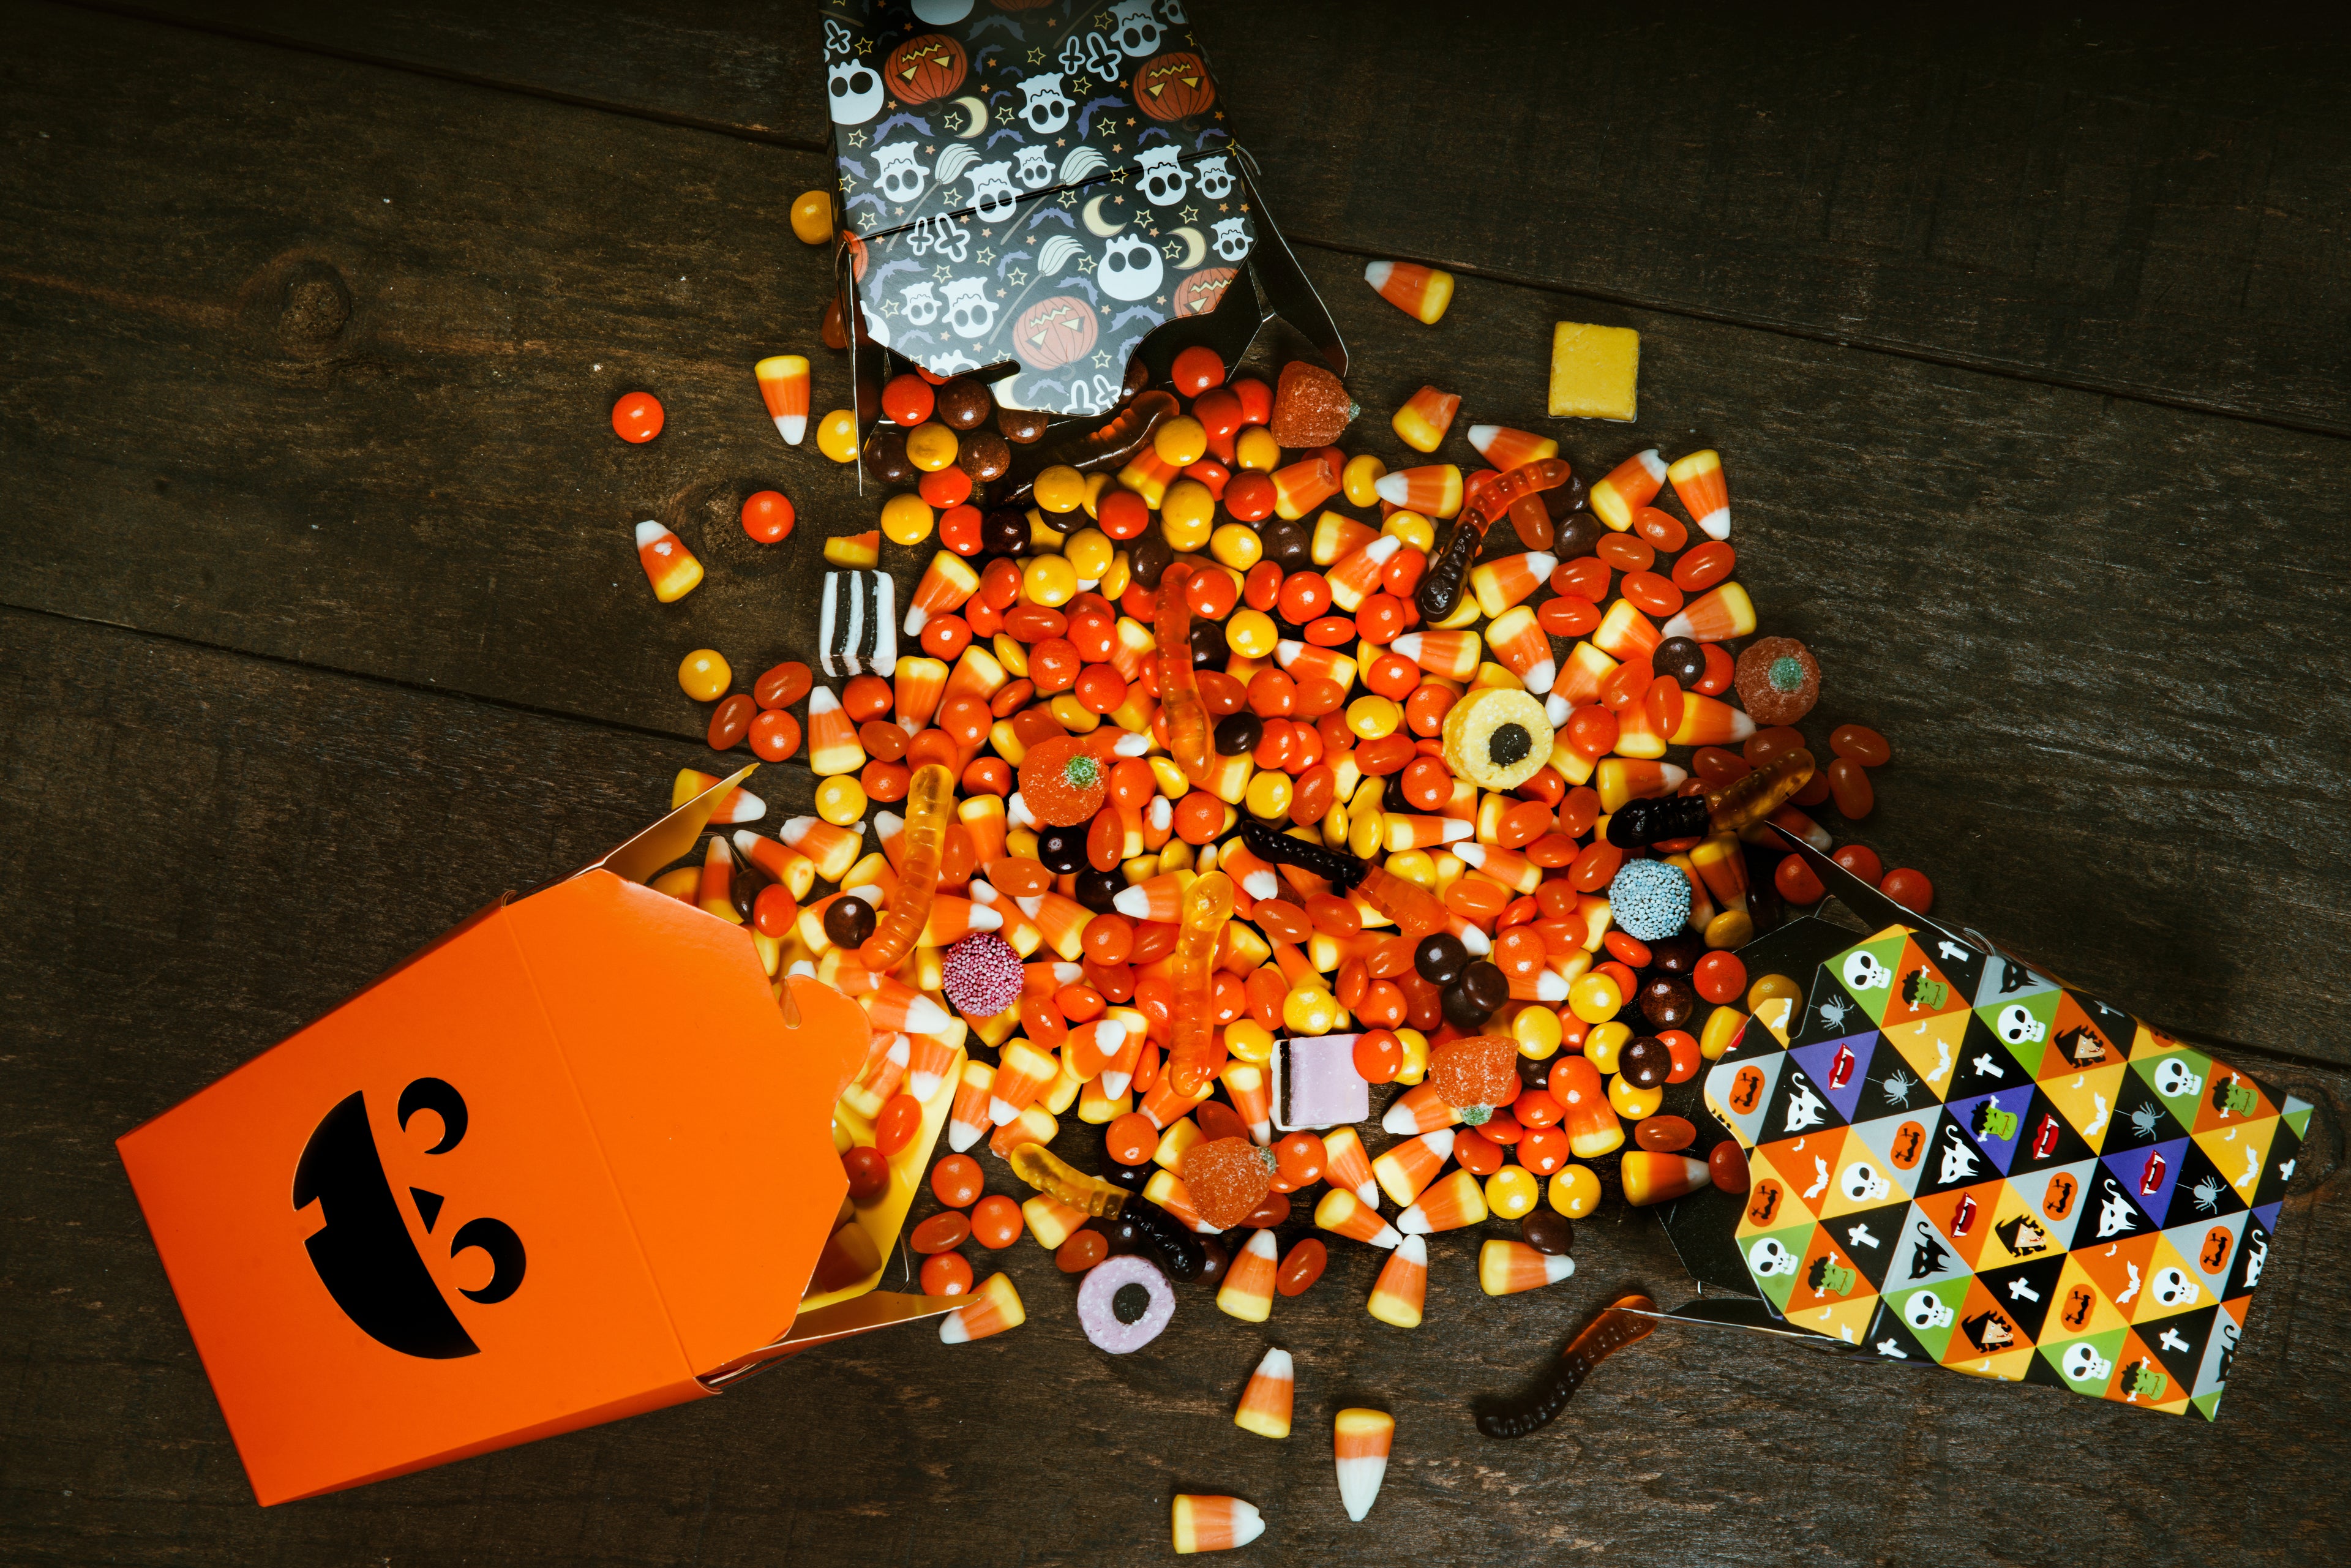 Vibrant Halloween candy assortment, featuring candy corn and assorted sweets, elegantly presented in our Halloween gift baskets on a rustic wooden floor